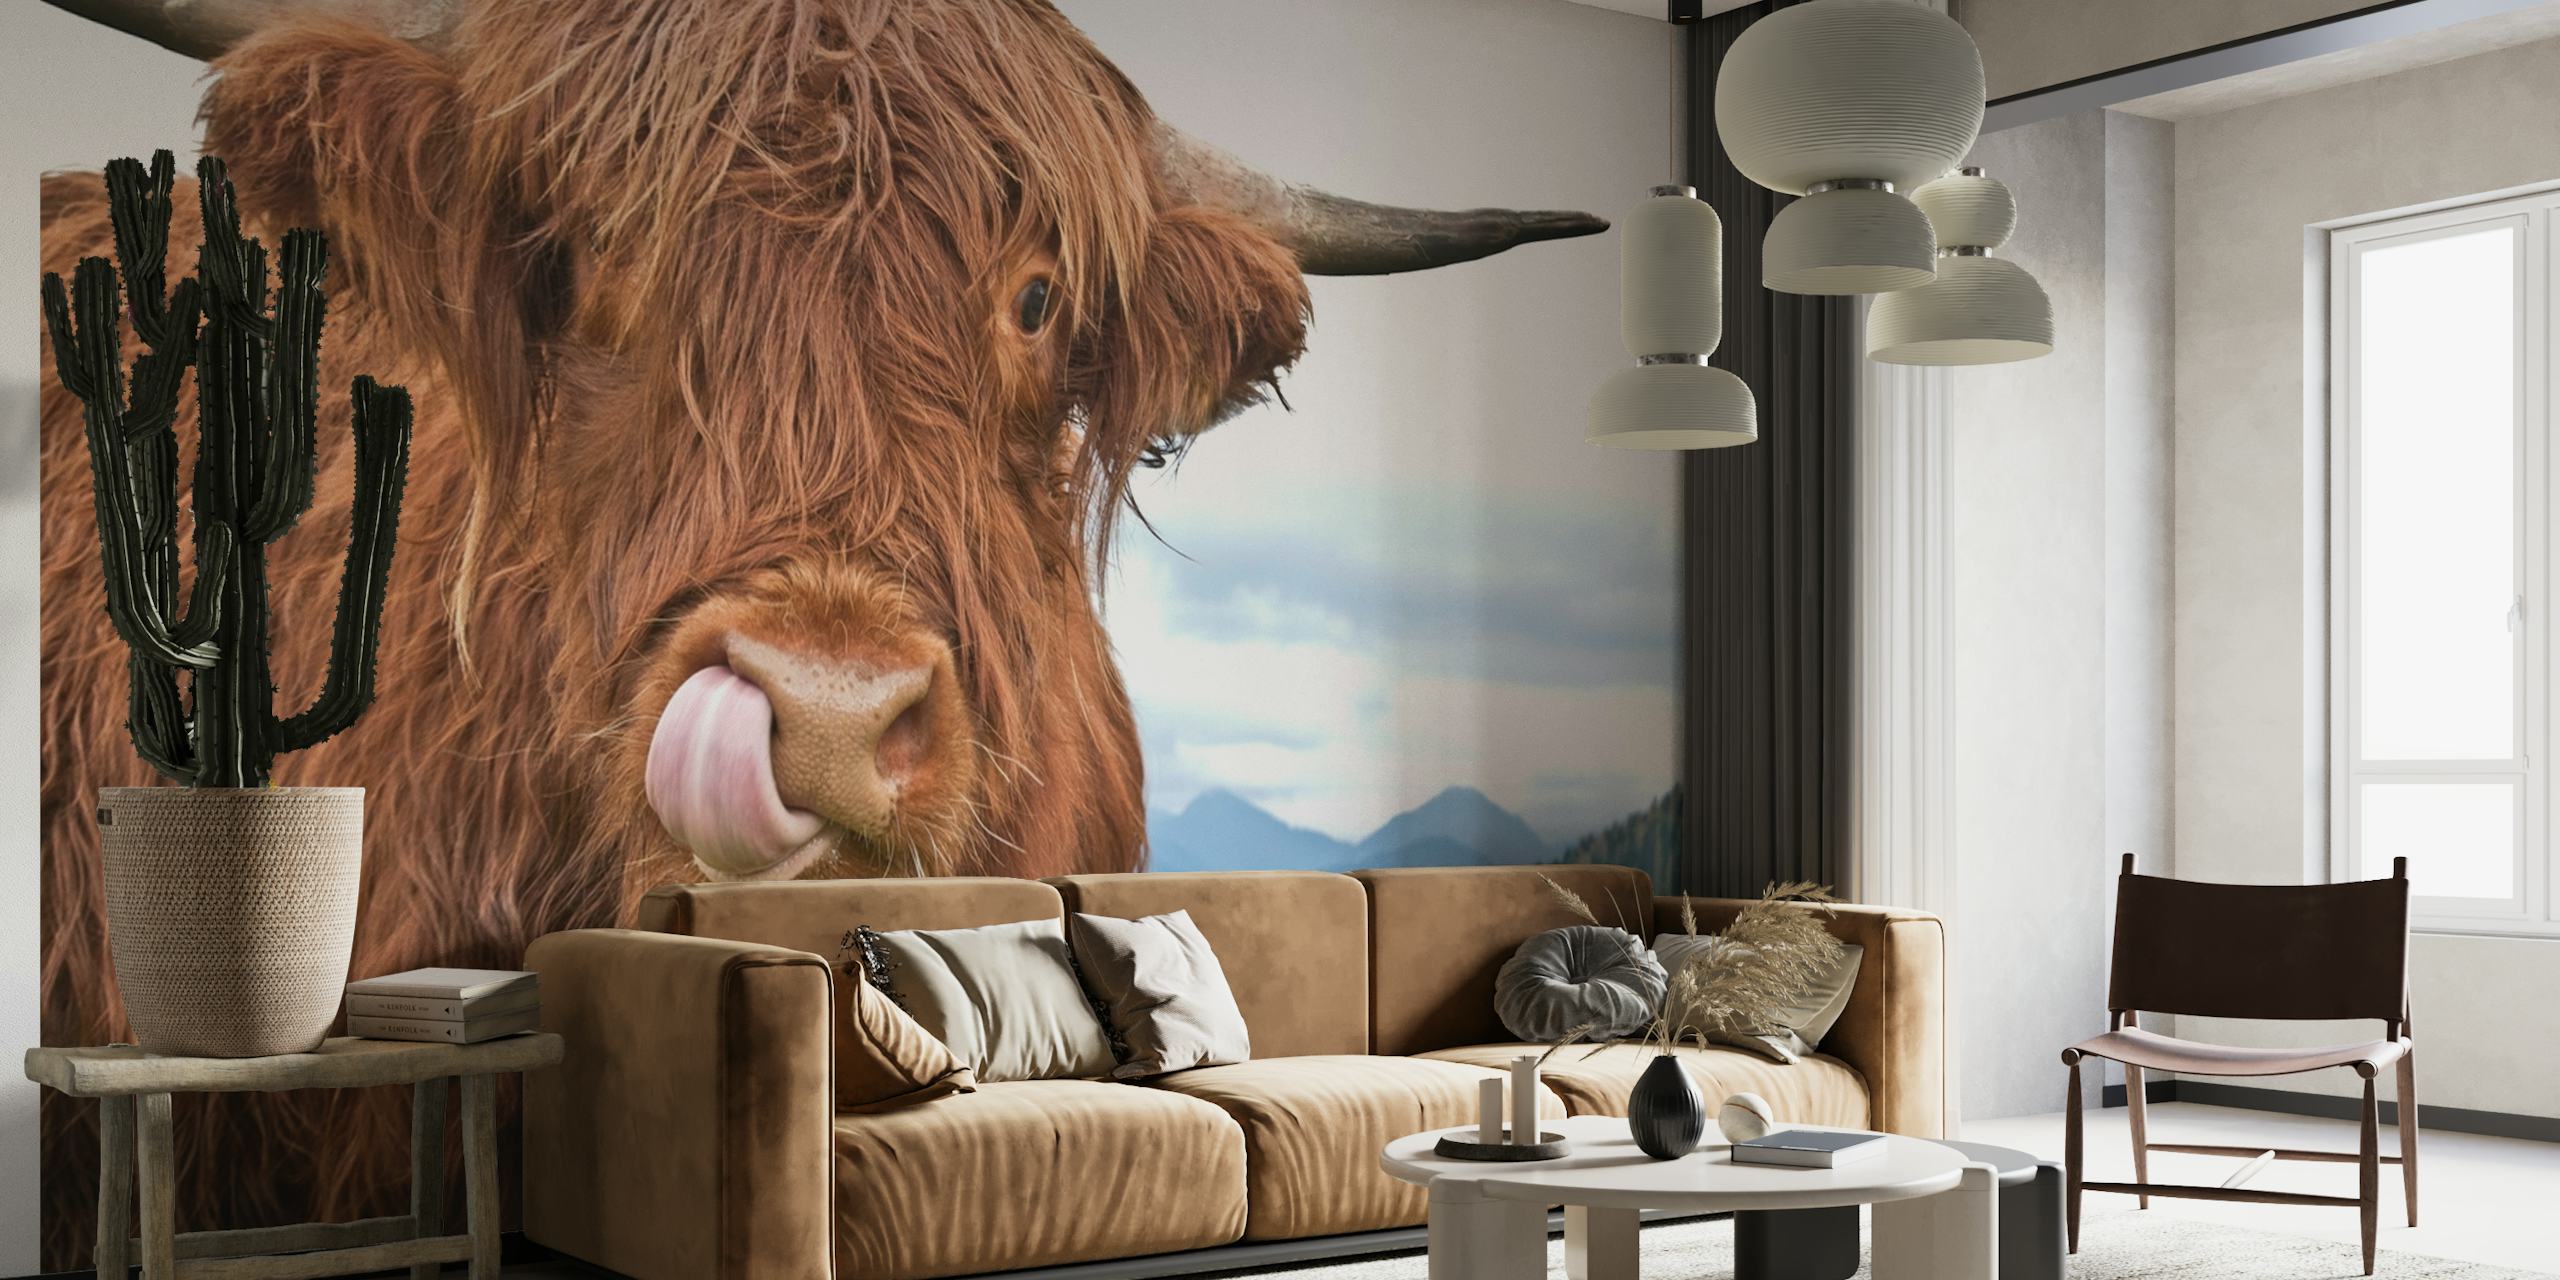 Highland cow with shaggy hair sticking out tongue against landscape backdrop on a wall mural